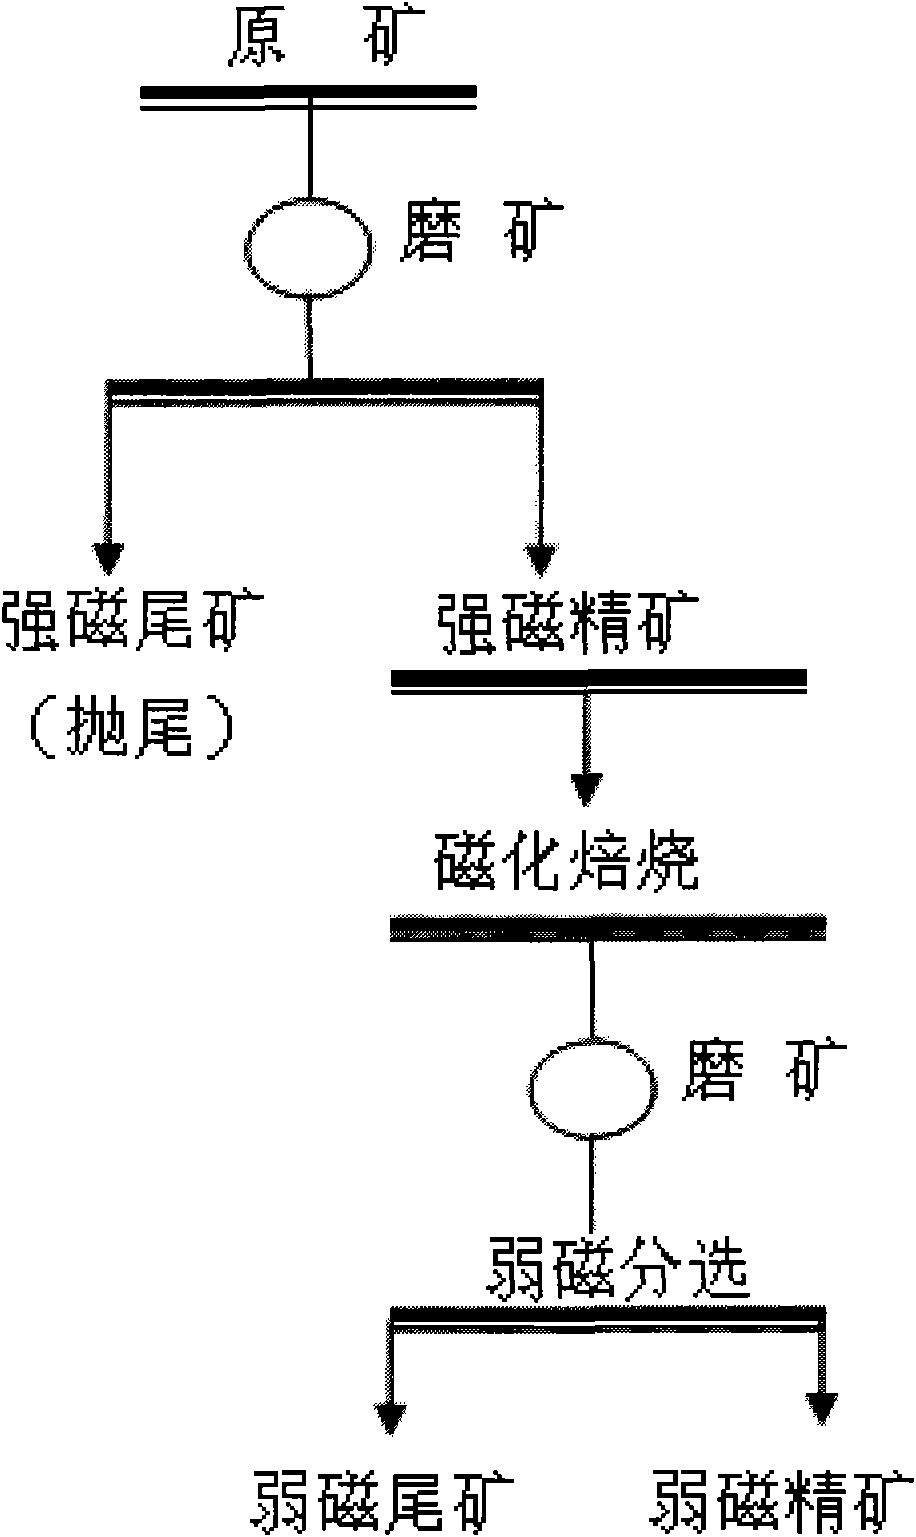 Separation-smelting combined method for producing iron ore concentrate from oolitic lean hematite